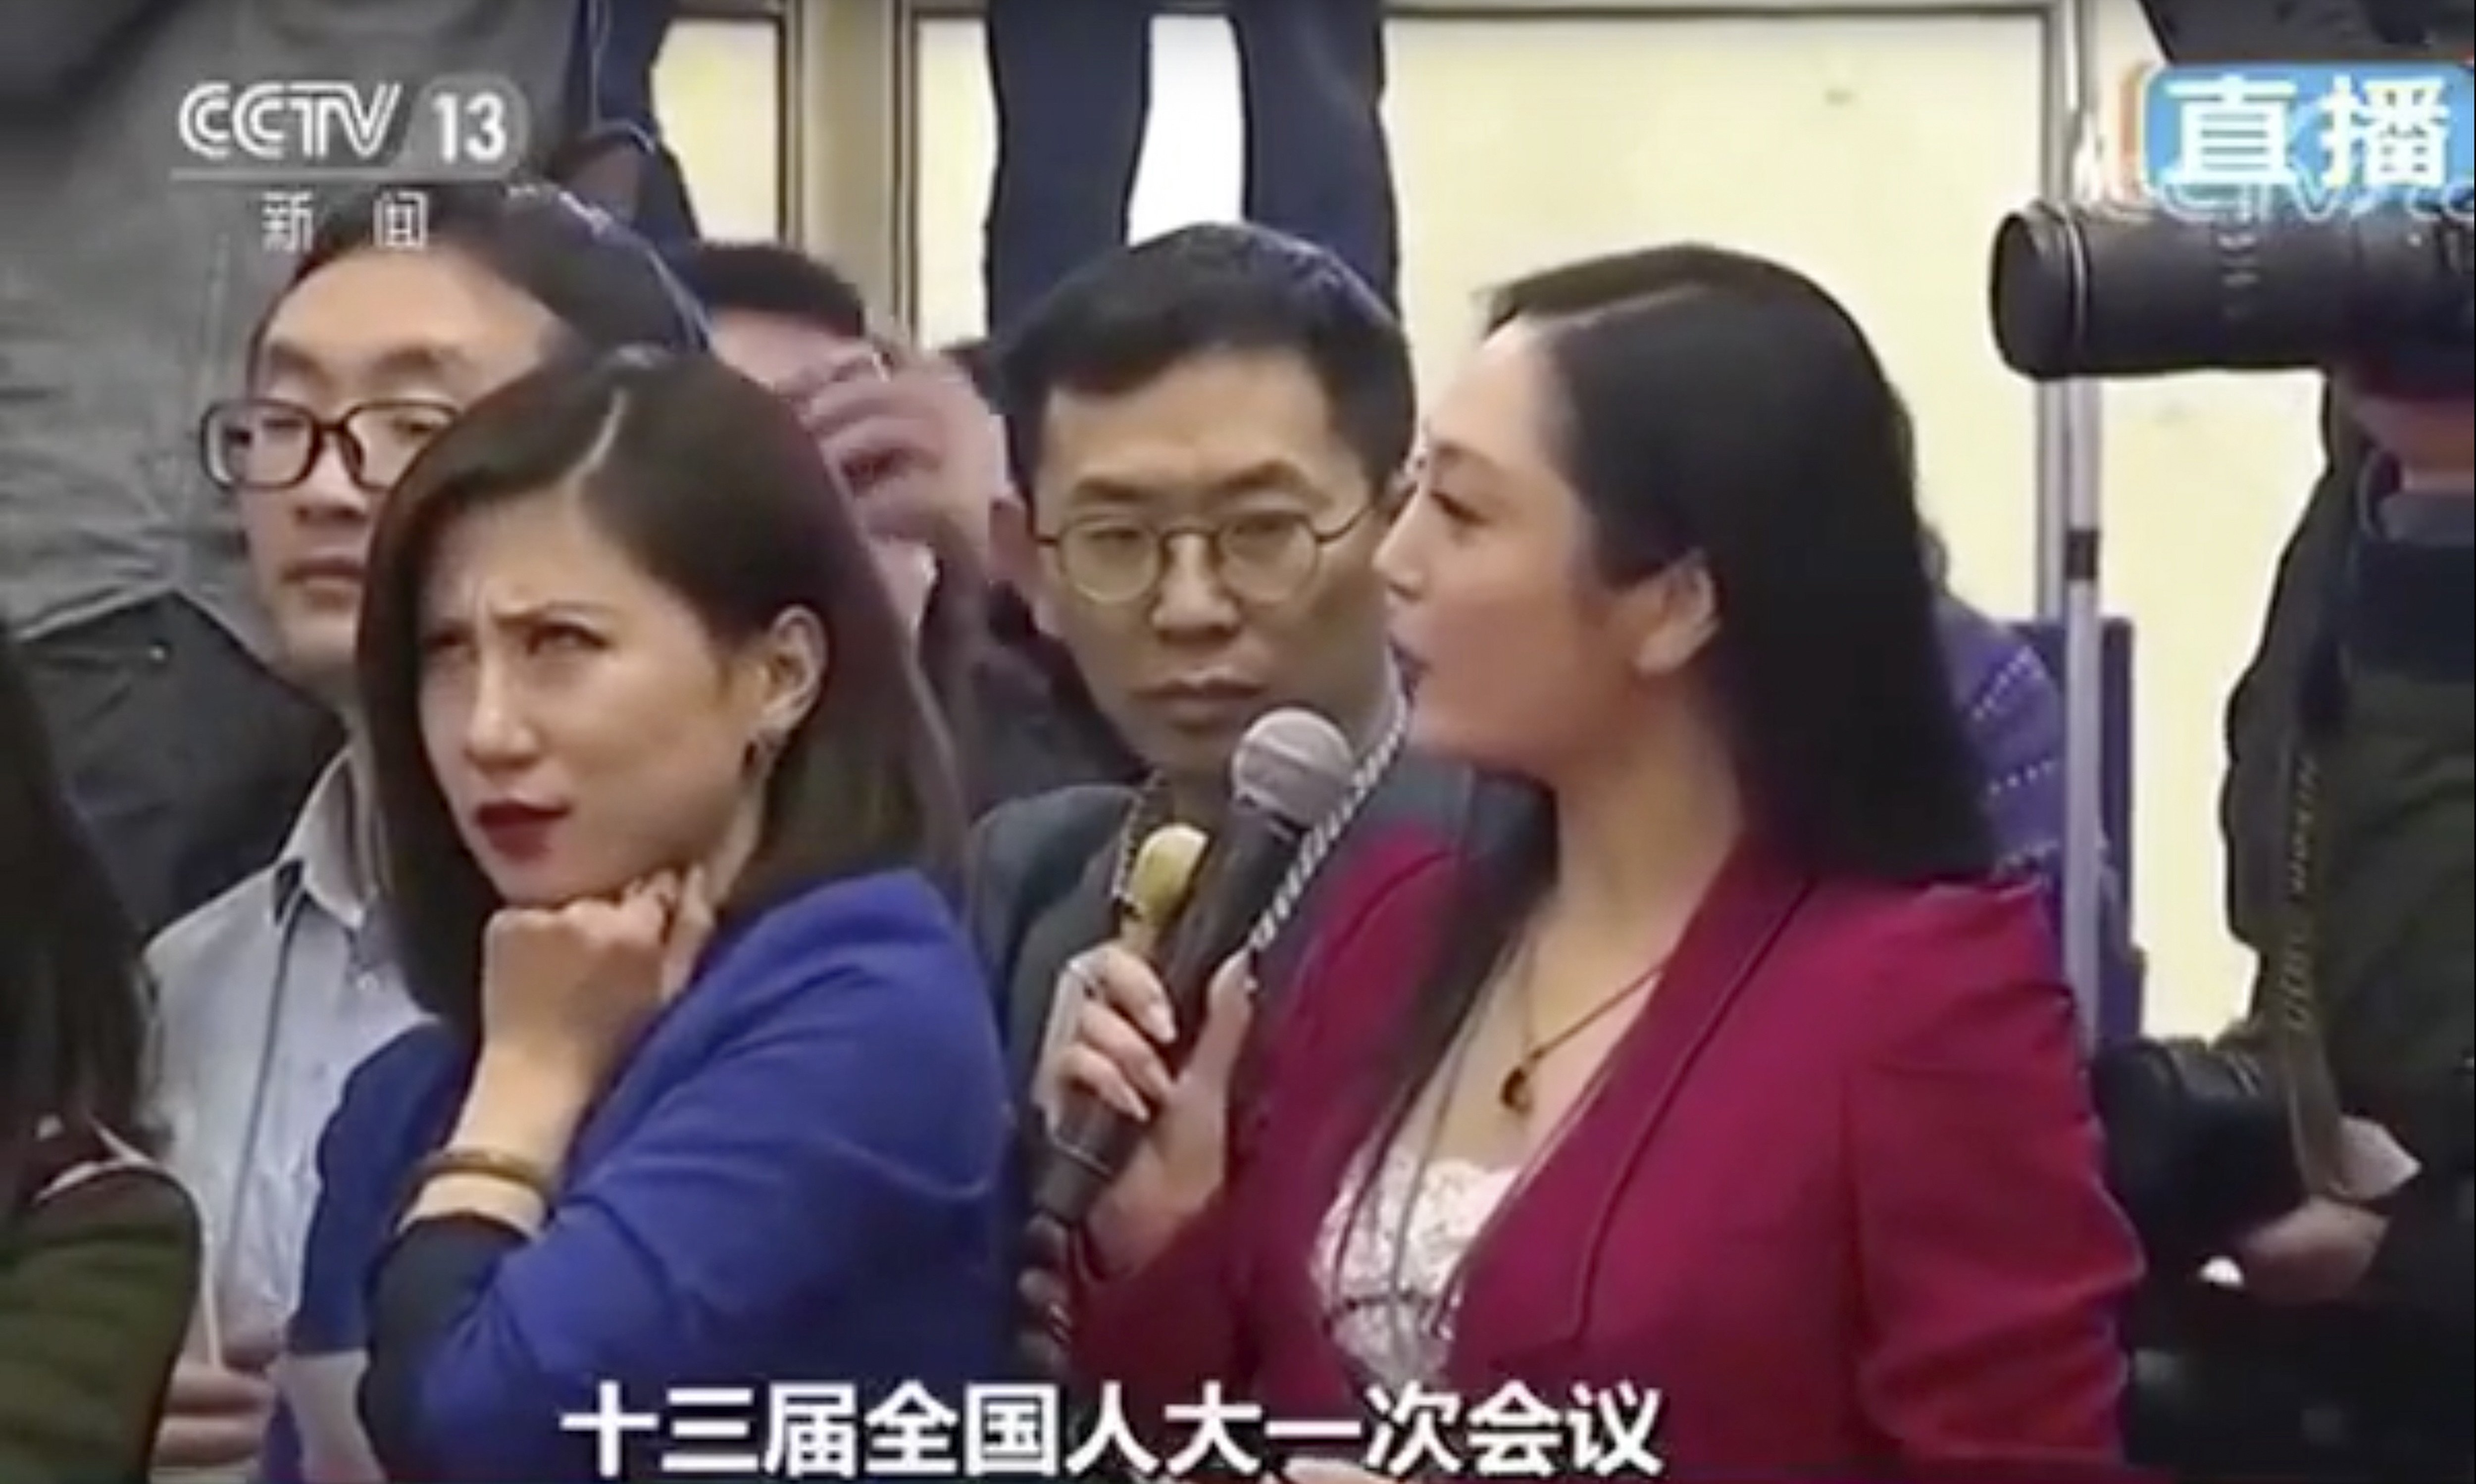 Liang Xiangyi, a reporter for China Business News, gives an epic eye-roll as fellow journalist Zhang Huijun asks a tedious question to a government minister. Photo: CCTV